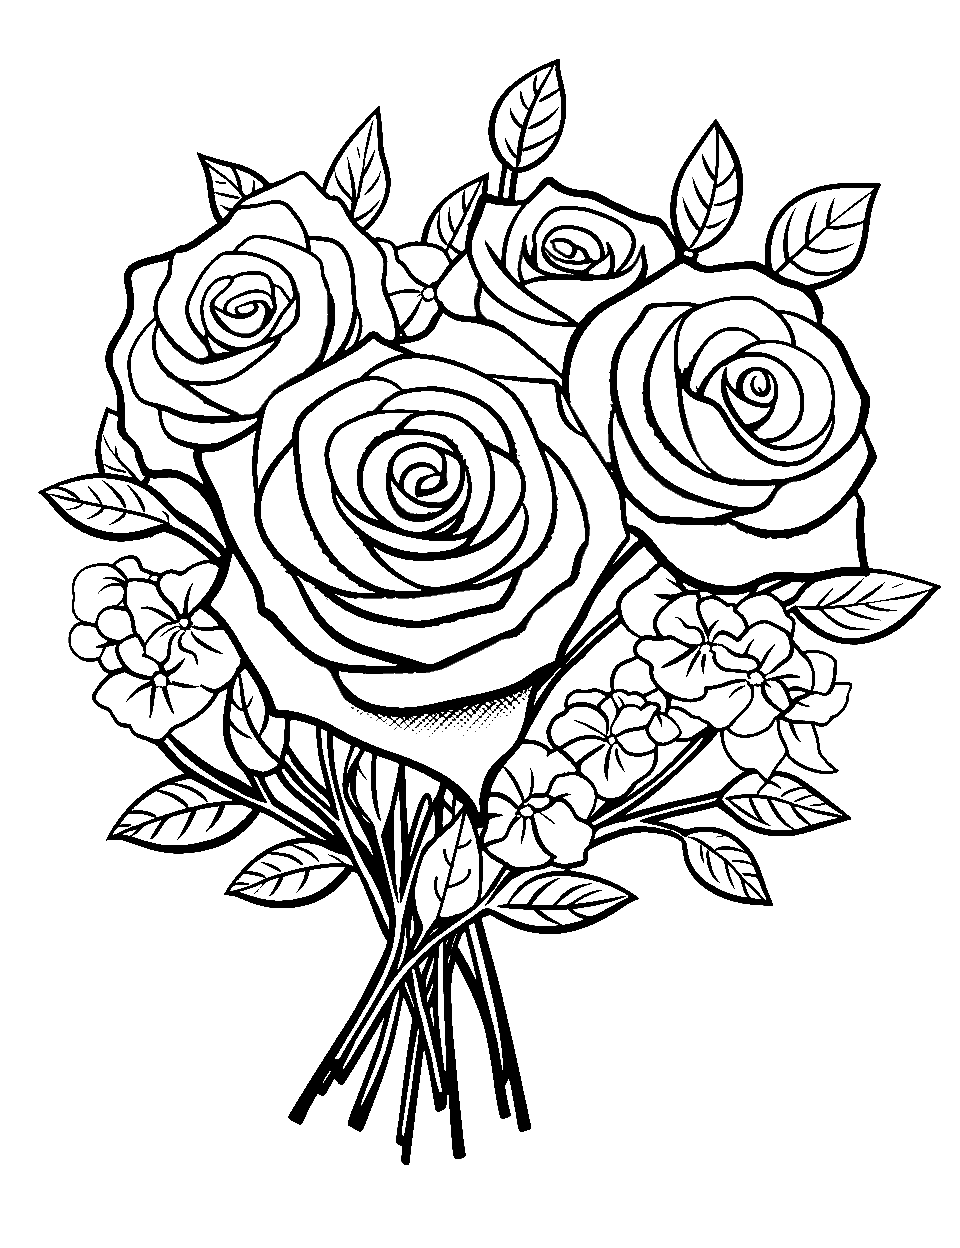 Detailed Rose Bouquet Coloring Page - A detailed bouquet featuring roses of various sizes and states of bloom.